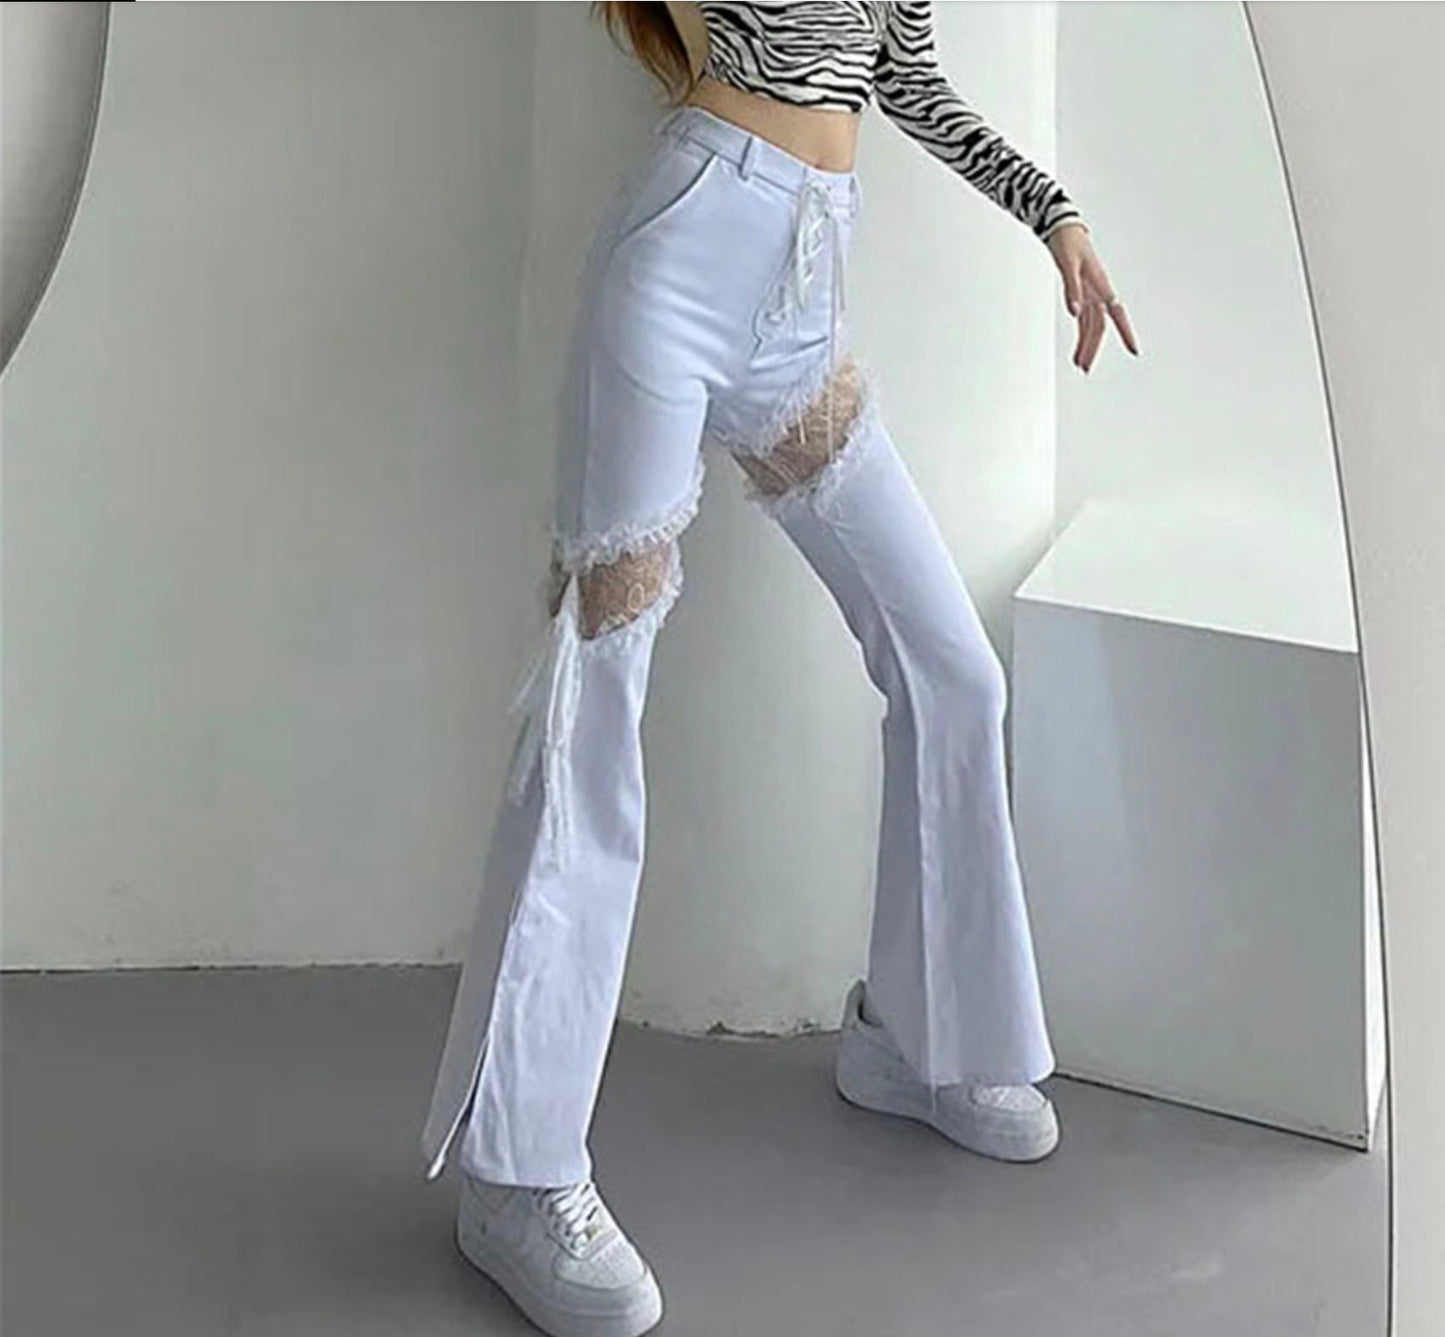 Gothic edgy goth Y2k Lace Stitching Hollow Out Side Slit Bandage High Waist Flared Jeans Slim Punk Streetwear Denim Pants Harajuku Trouser # 192